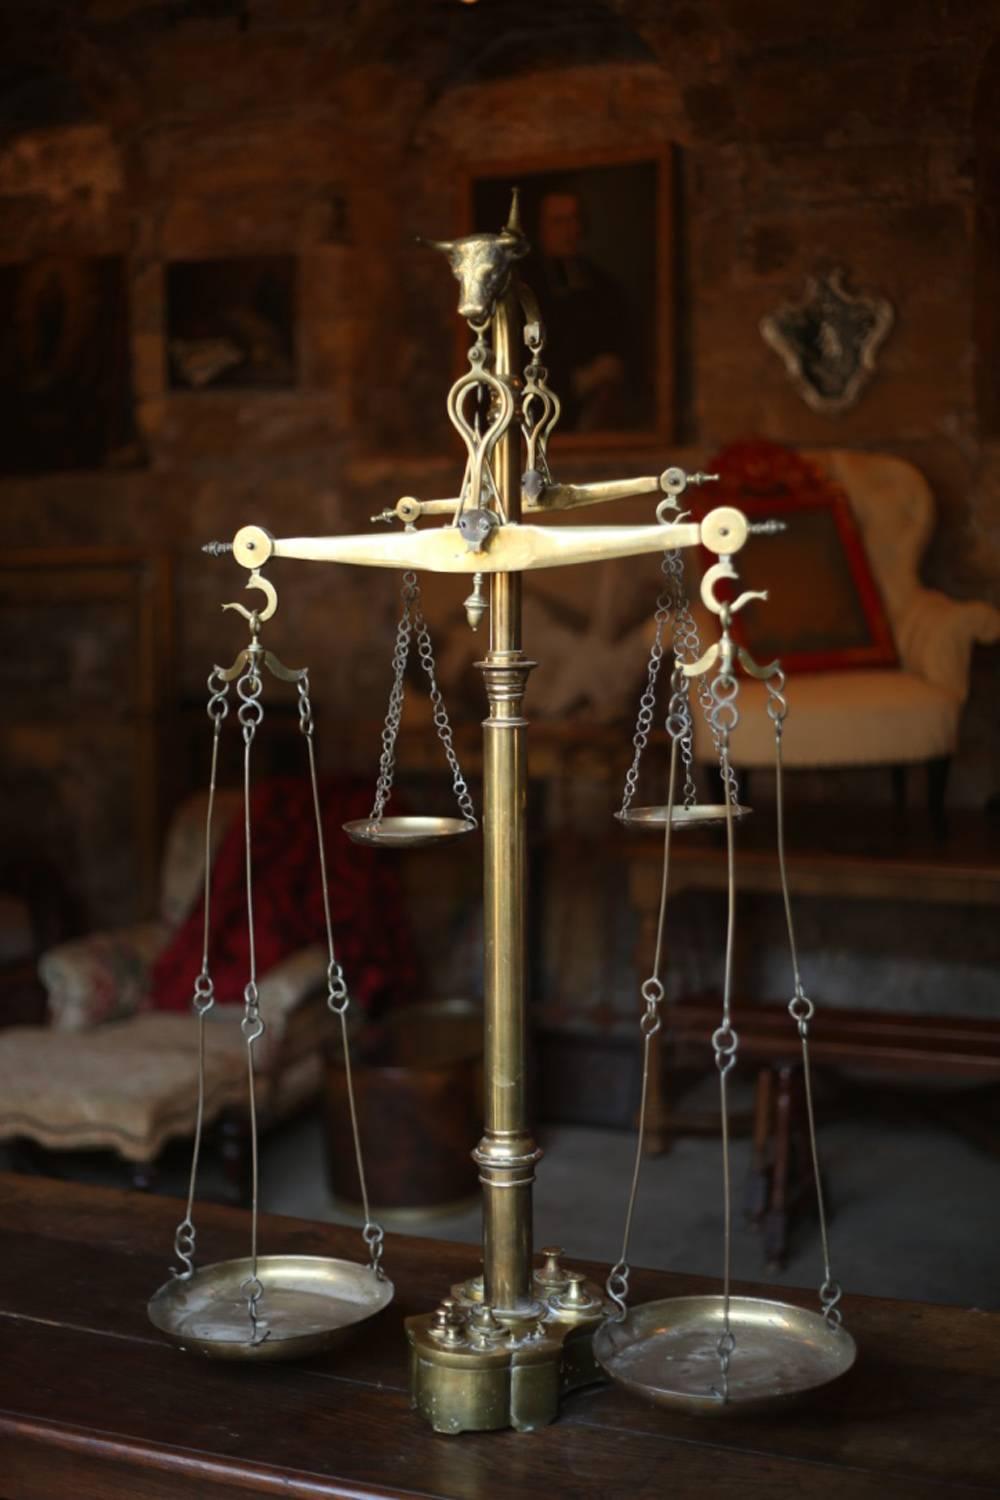 This is an exceptional set of very large early 20th century weighing scales from Portugal. There size and design tells me that they would have been used in a butchers shop rather than a domestic kitchen. The quality of the brass work is very high